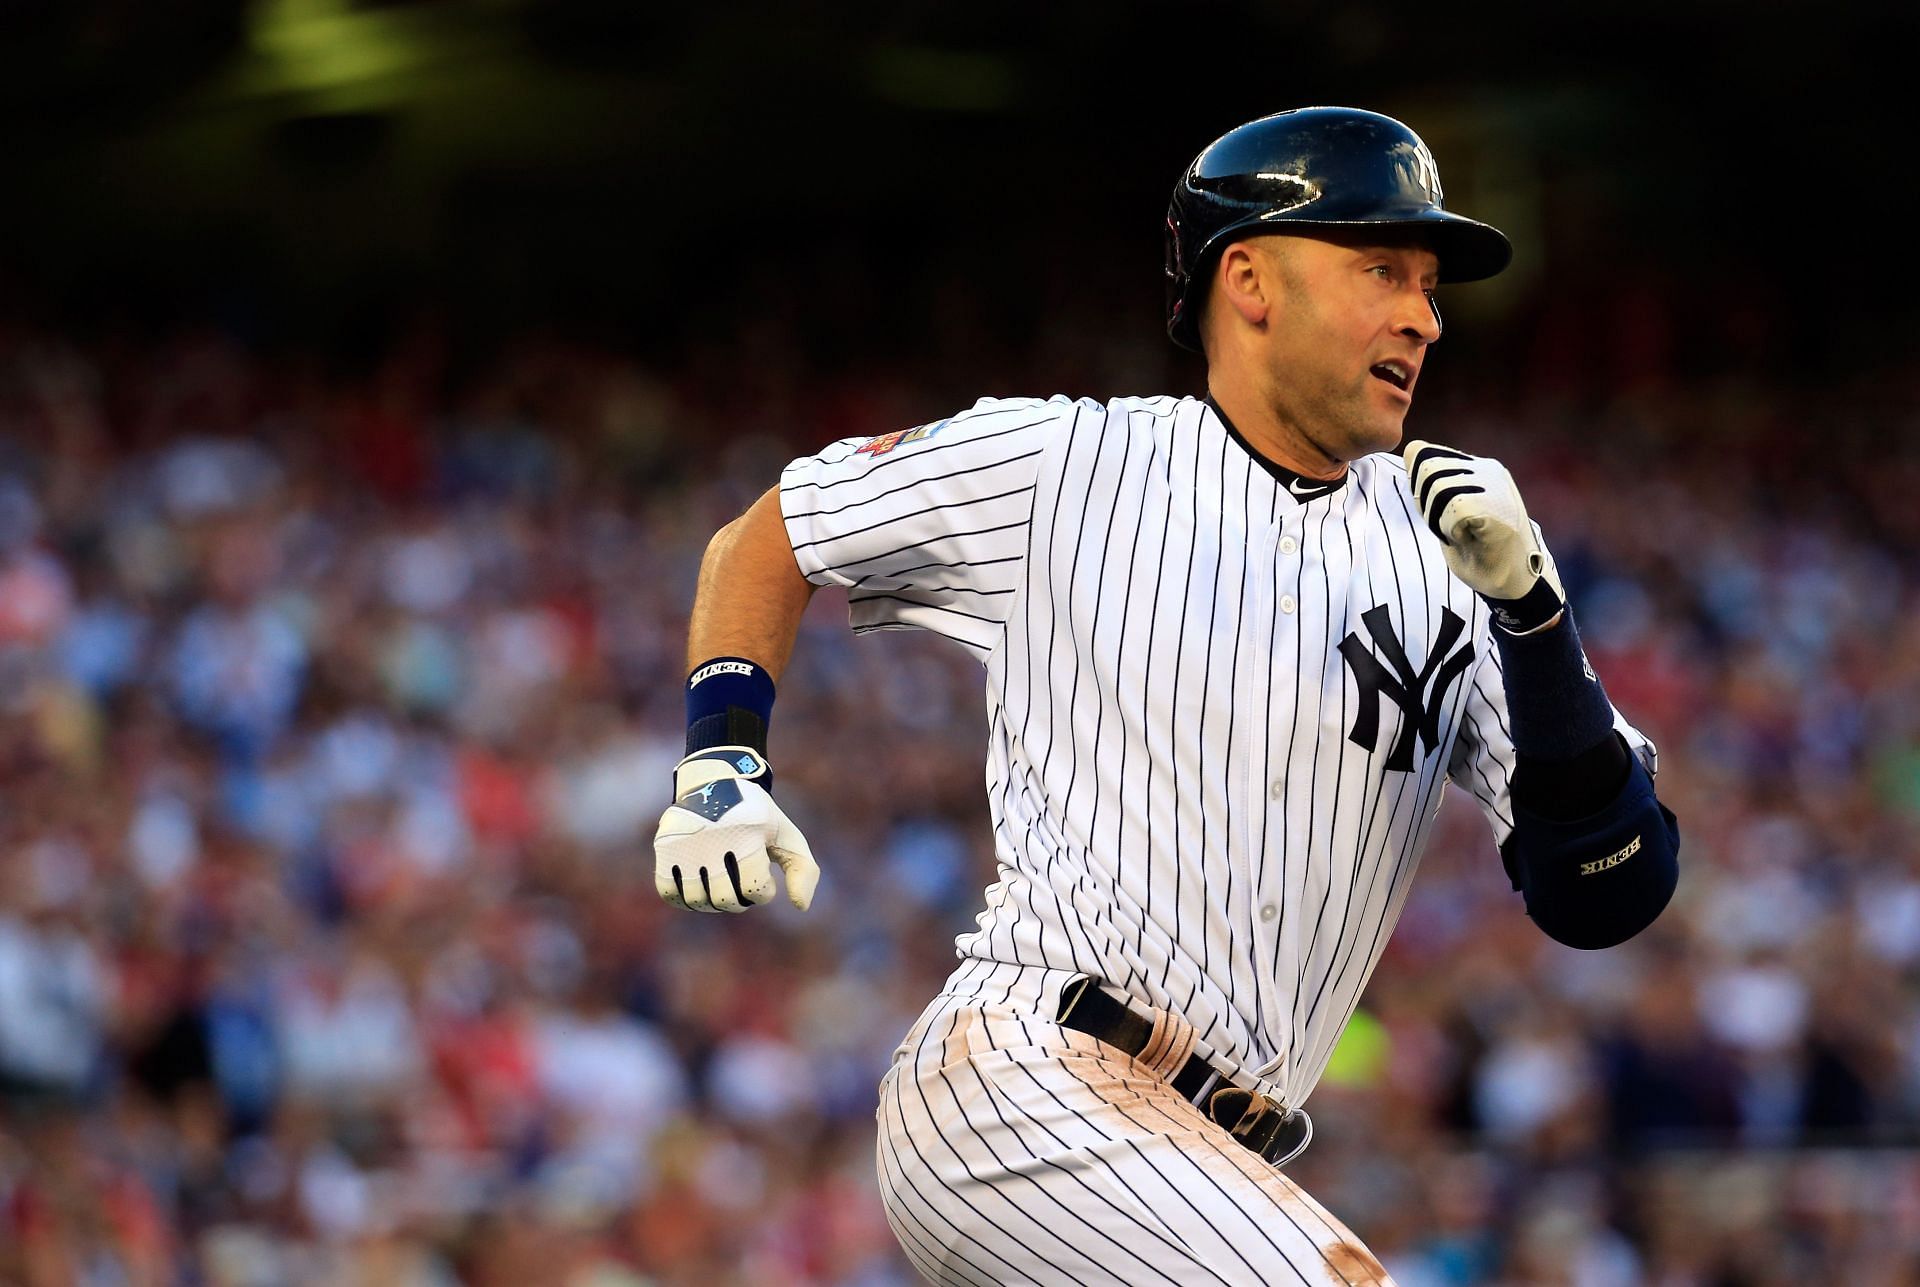 Yankees star Jeter to retire after 2014 season